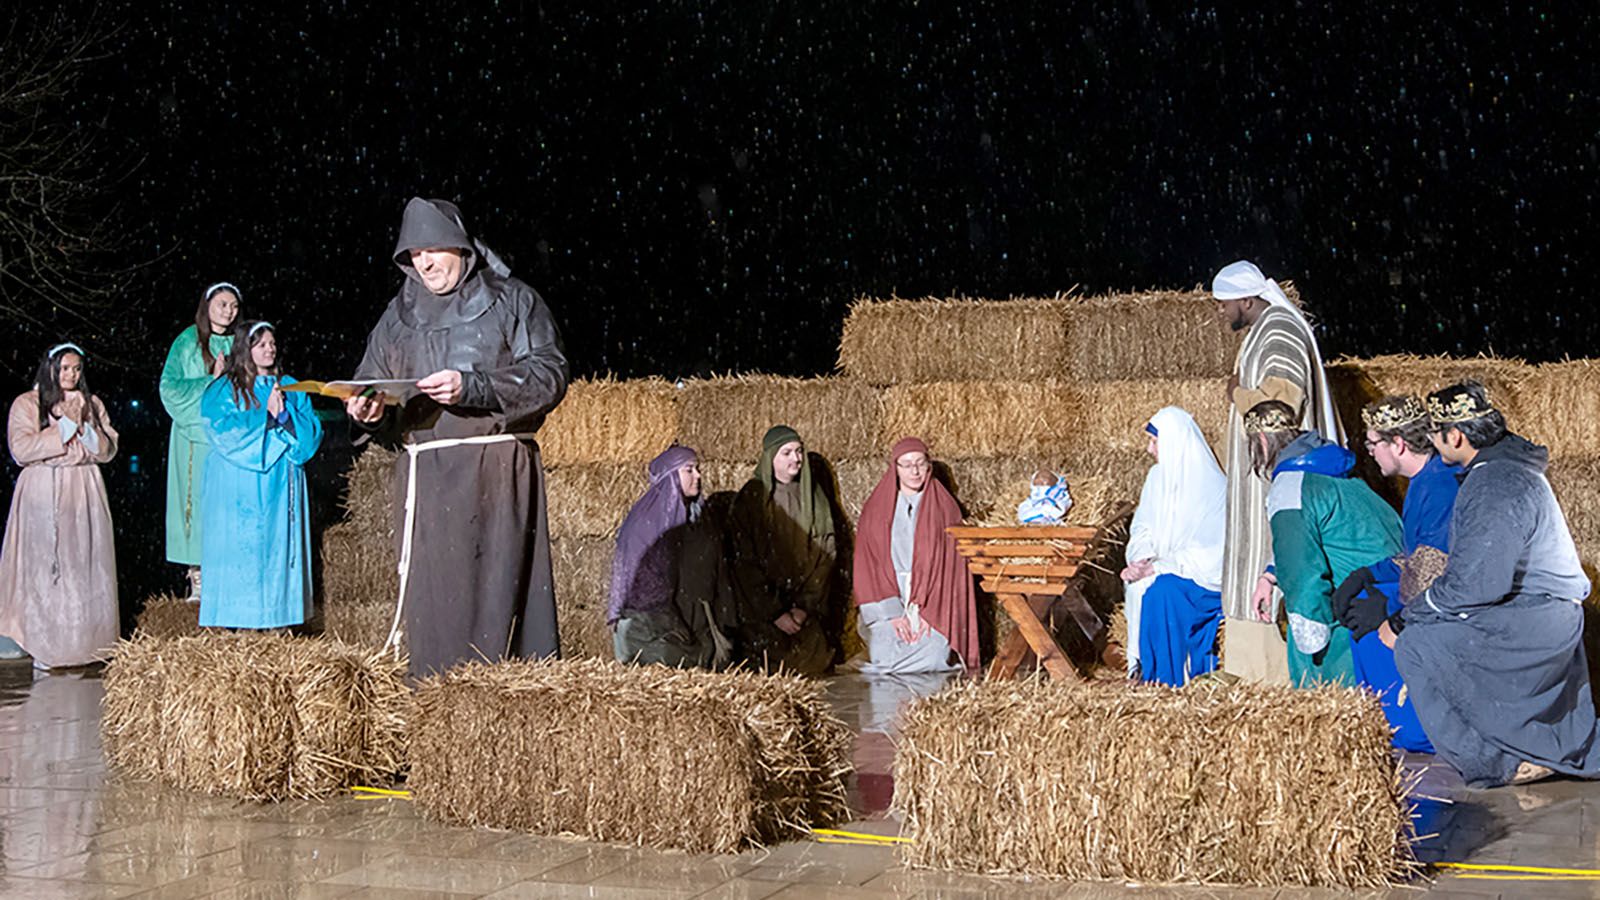 Community members will take in the University of Saint Francis' Living Nativity on Dec. 4.